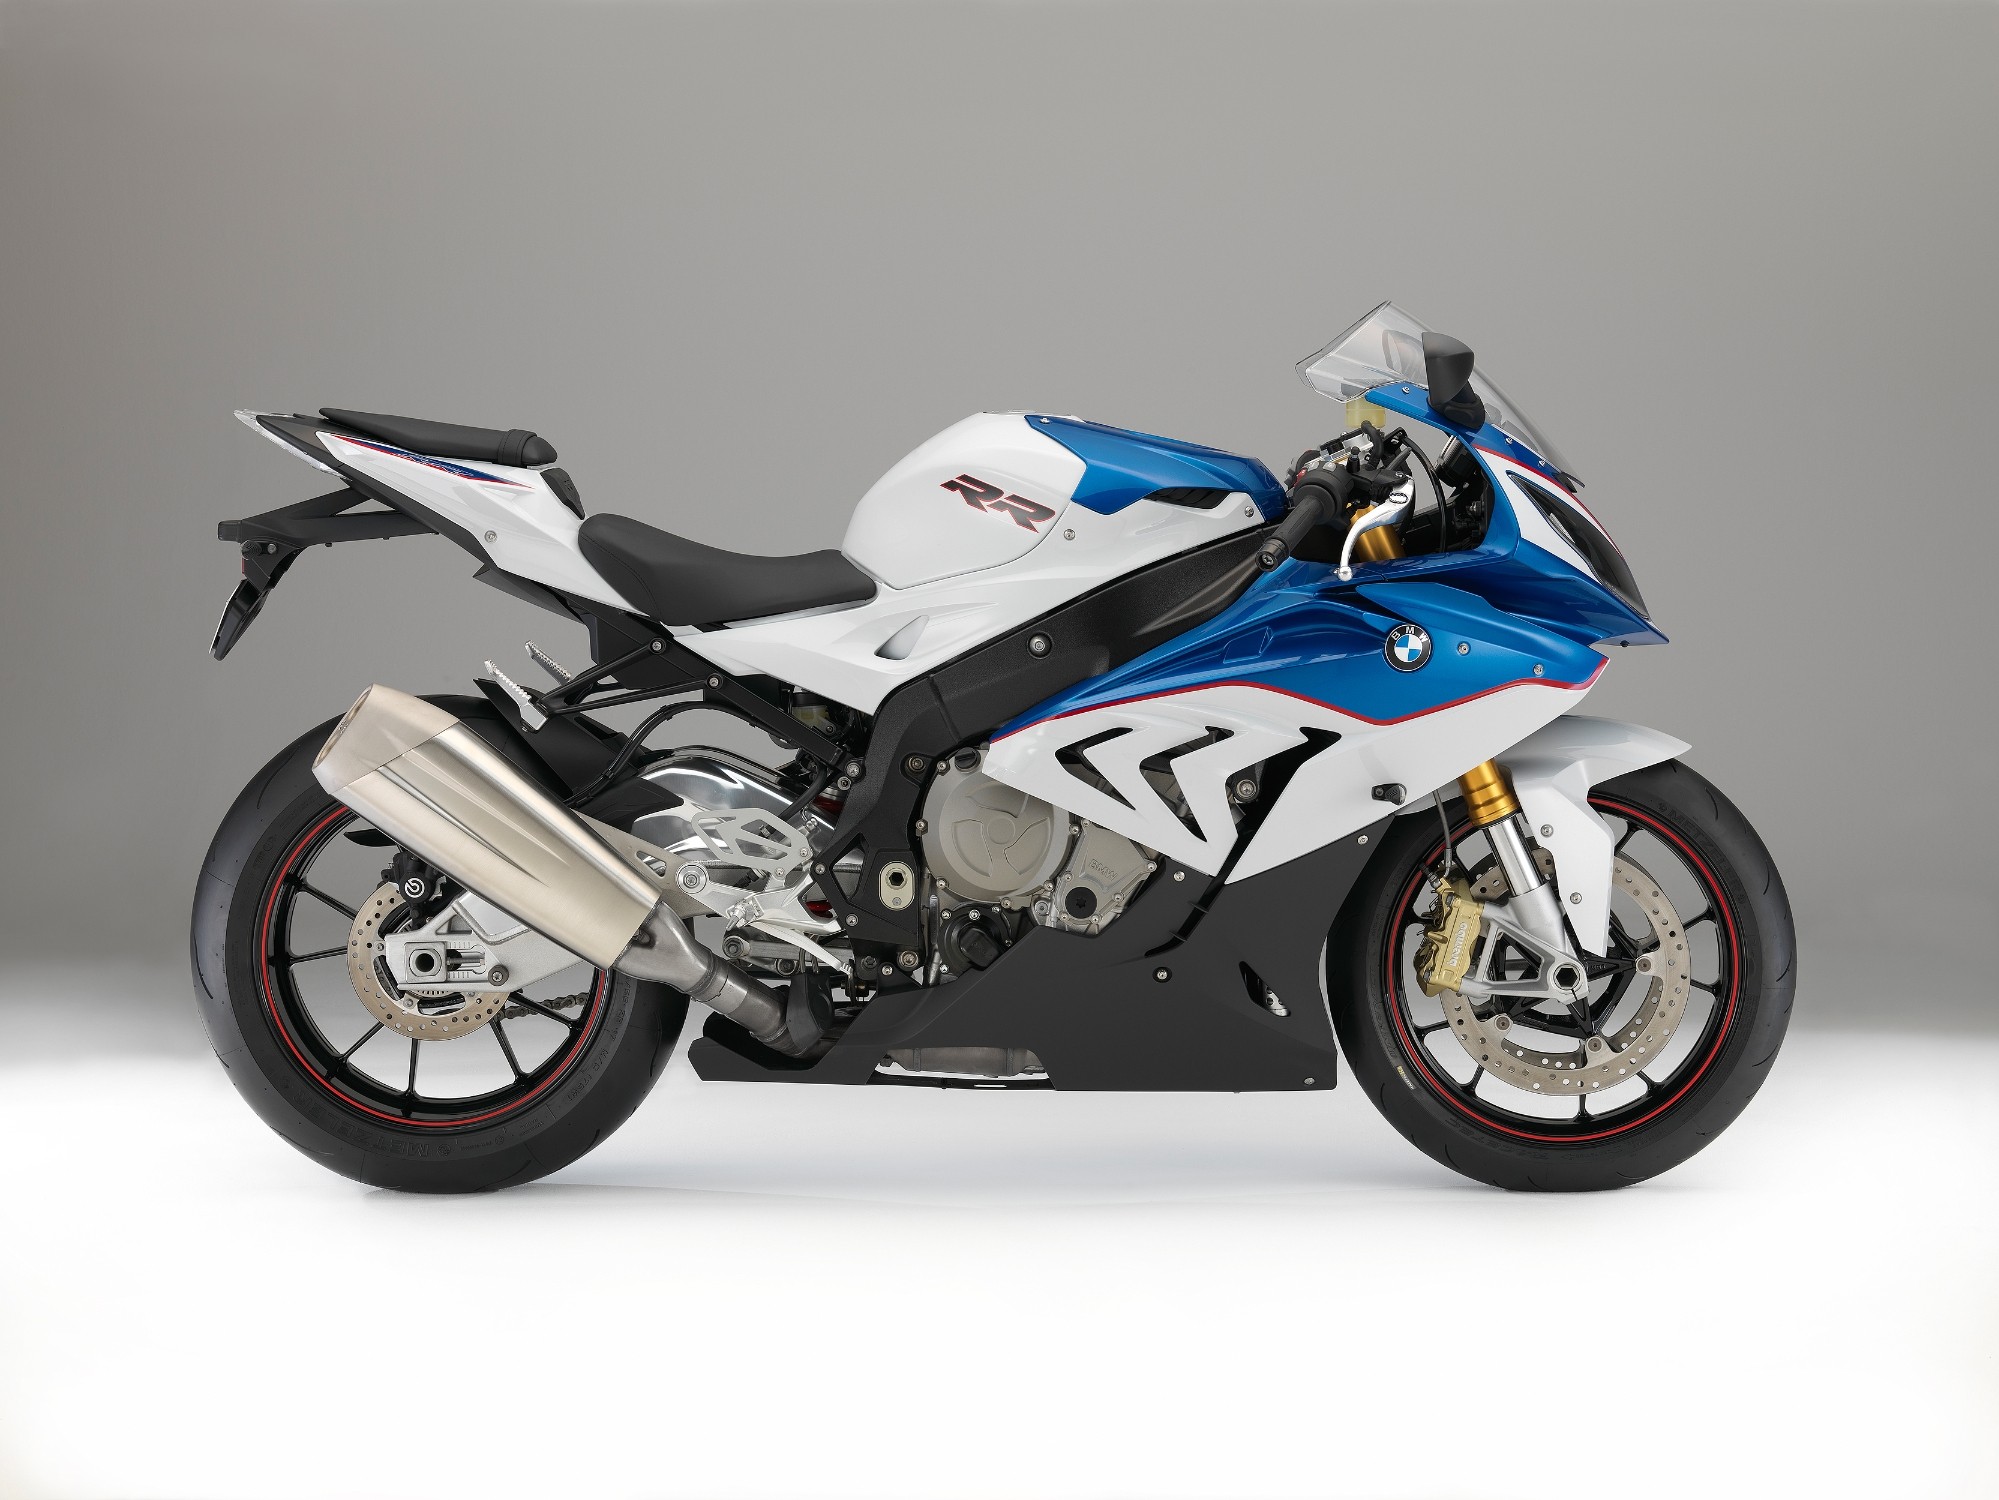 AN S1000RR BMW motorcycle in blue and white